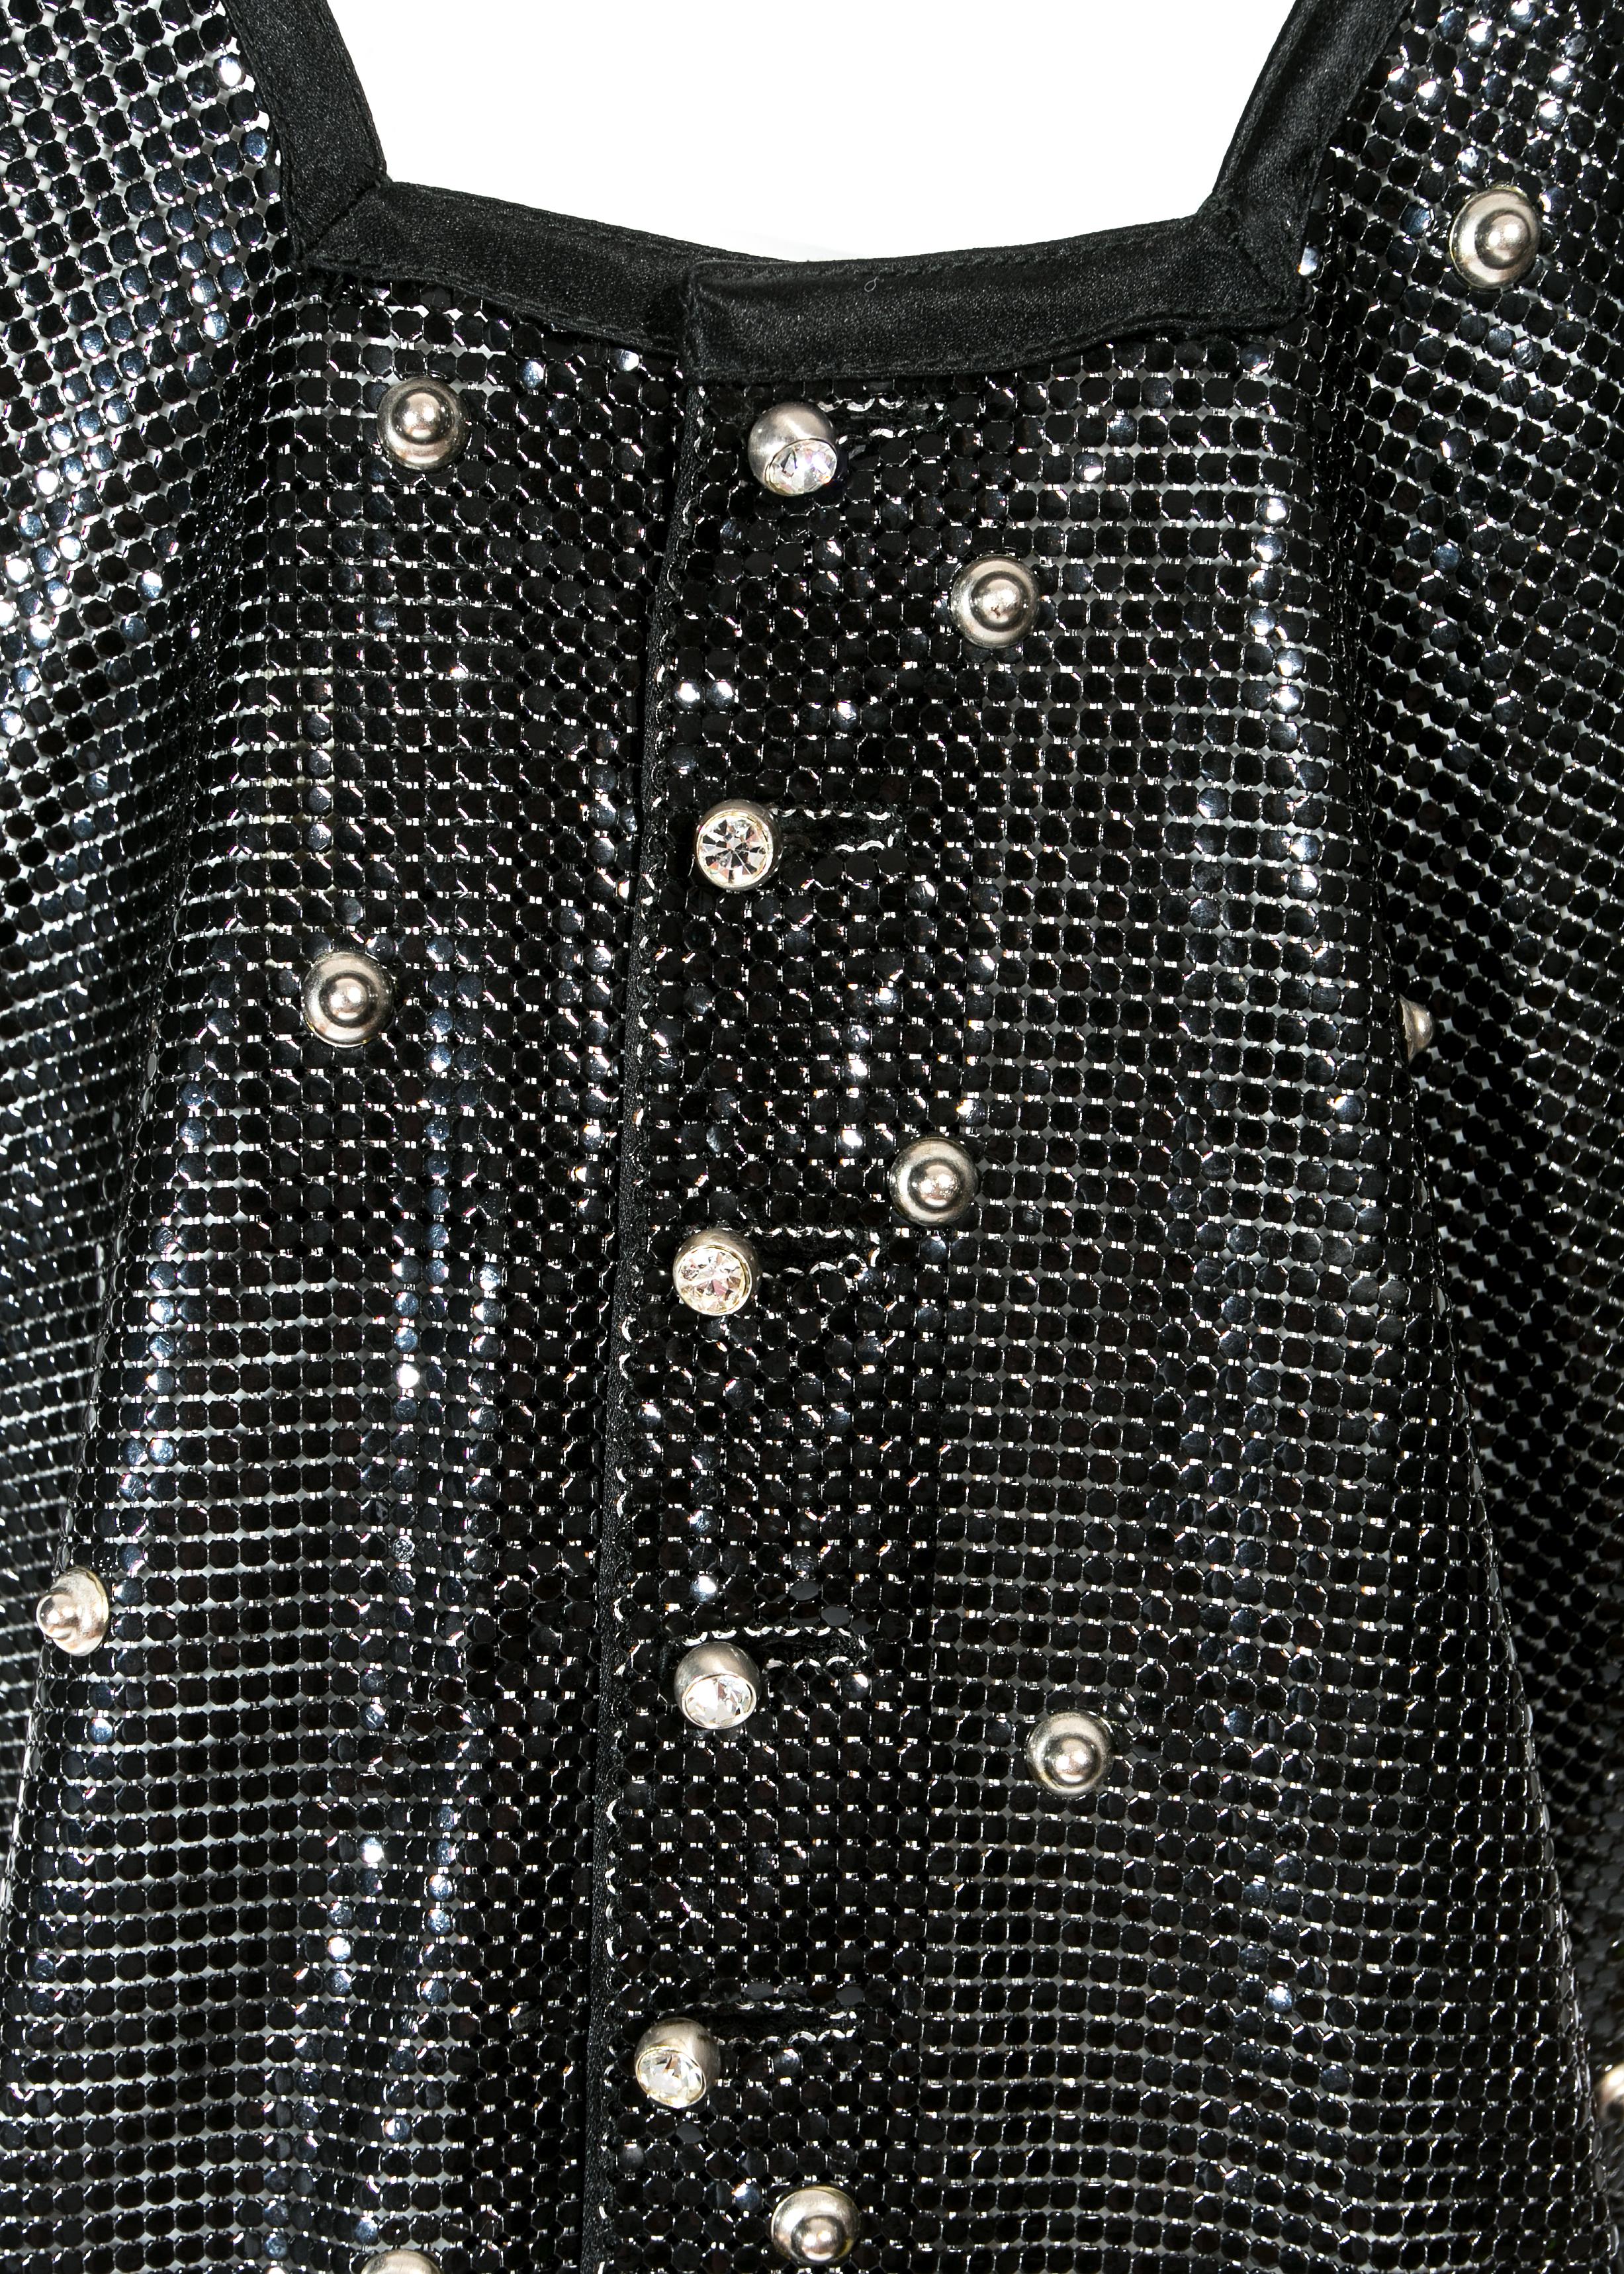 Gianni Versace black studded metal mesh chainmail shift dress, A/W 1983 In Good Condition For Sale In London, GB